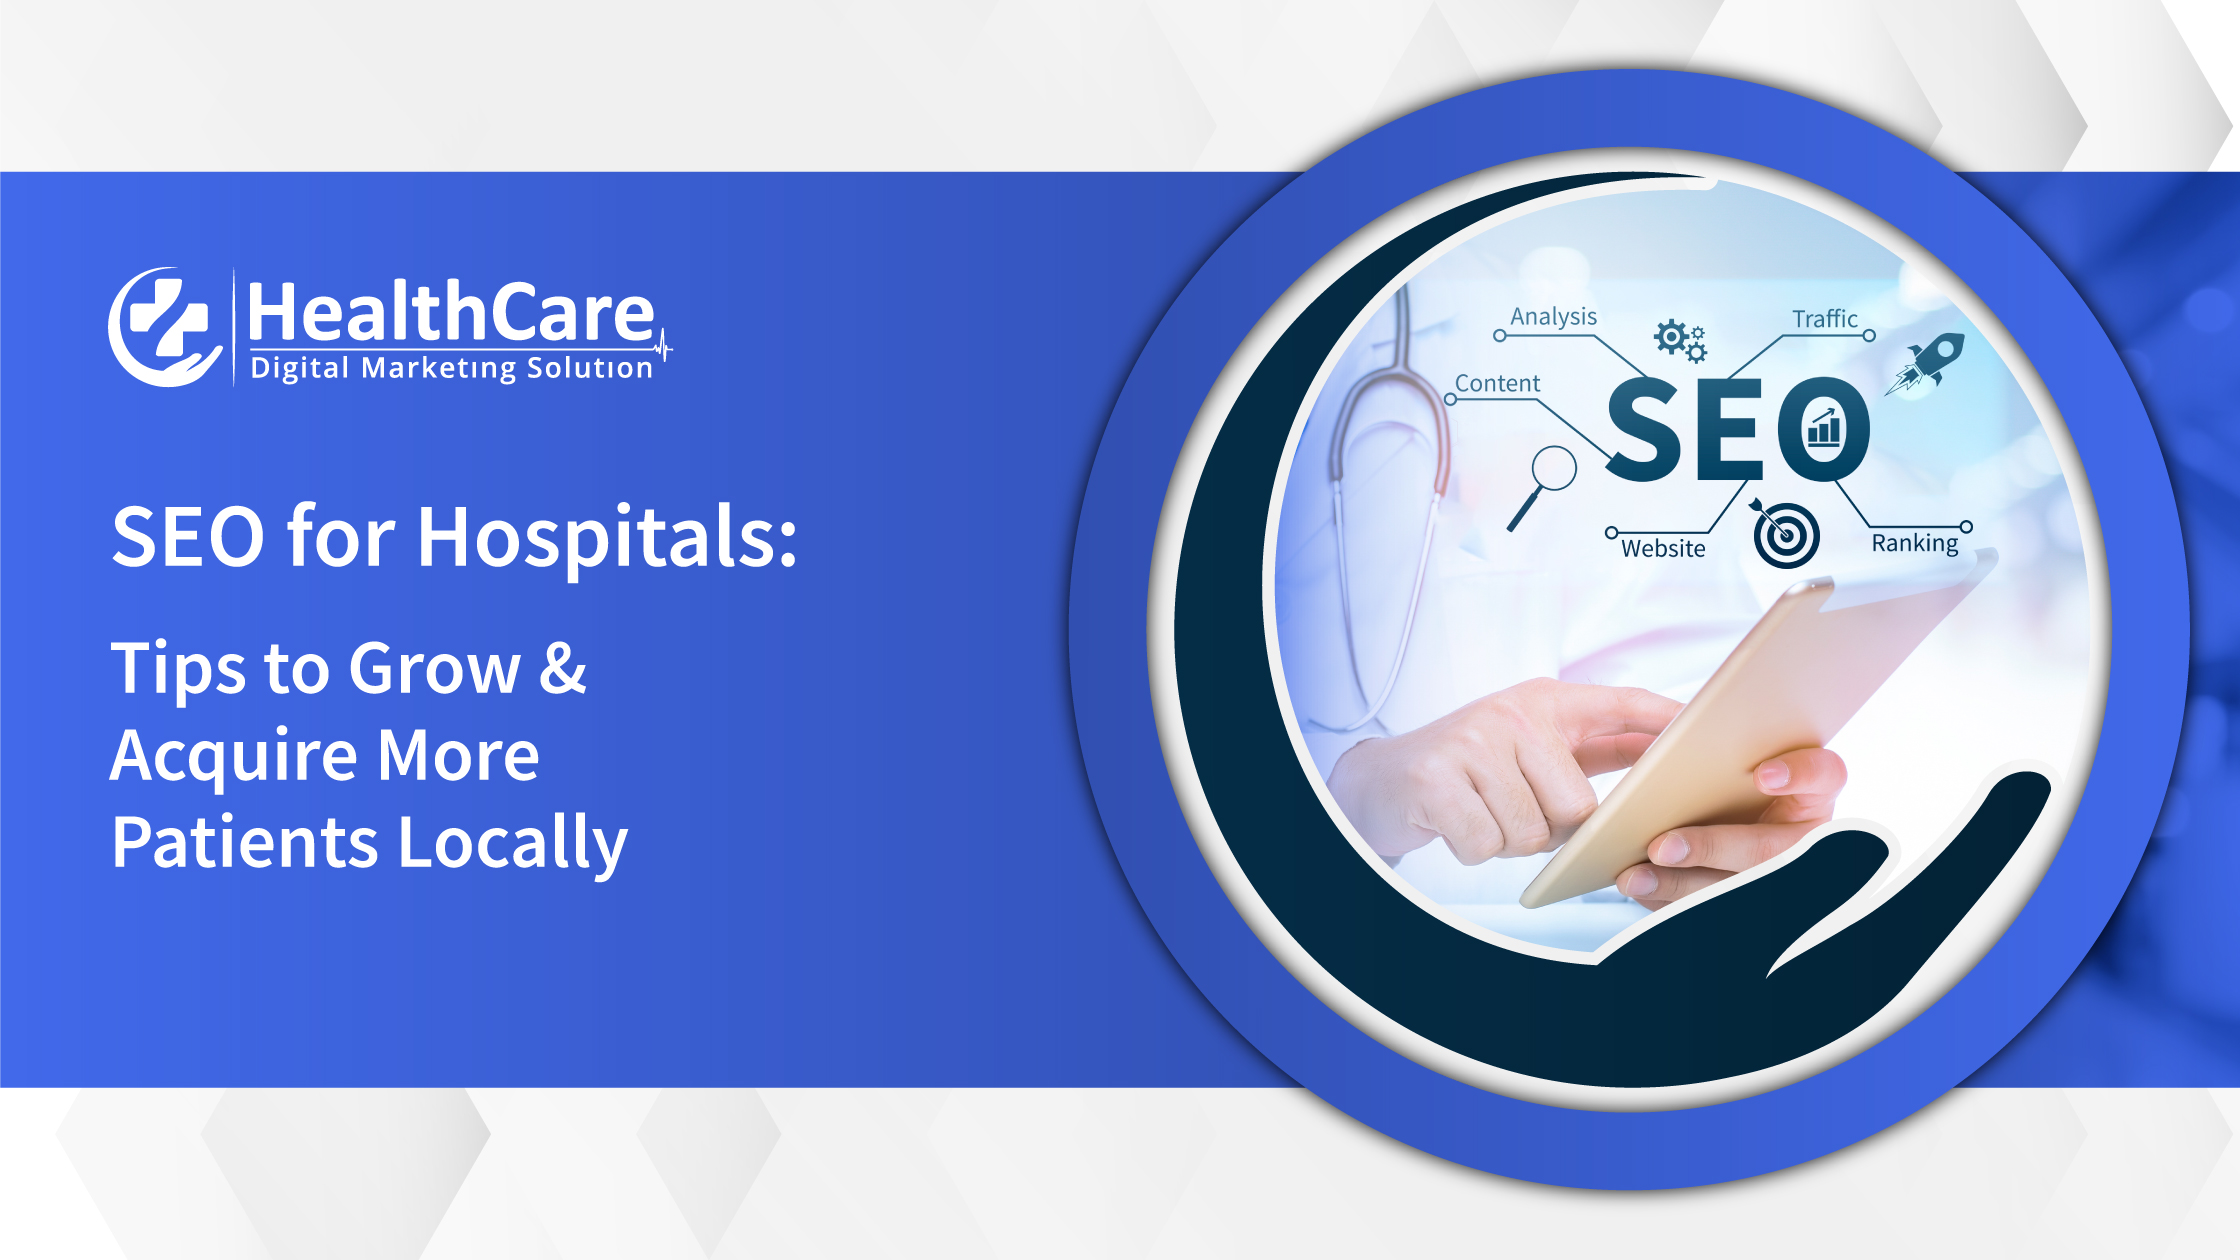 SEO For Hospitals: 9 Tips To Get More Patients Locally